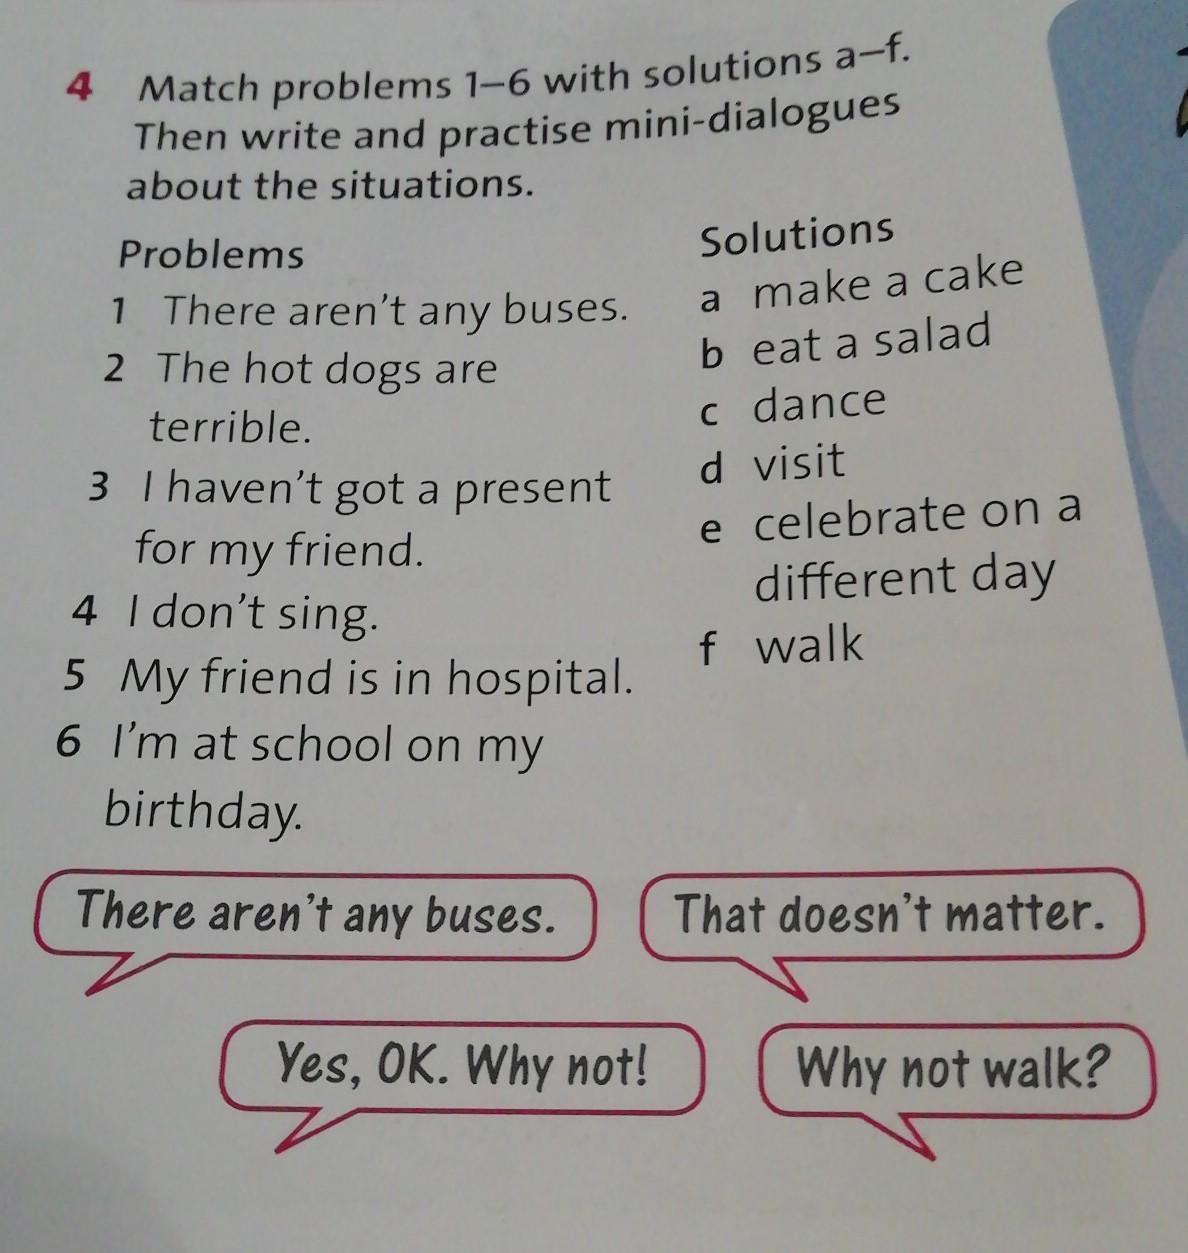 Complete the mini dialogues. Match the problems to the solutions.